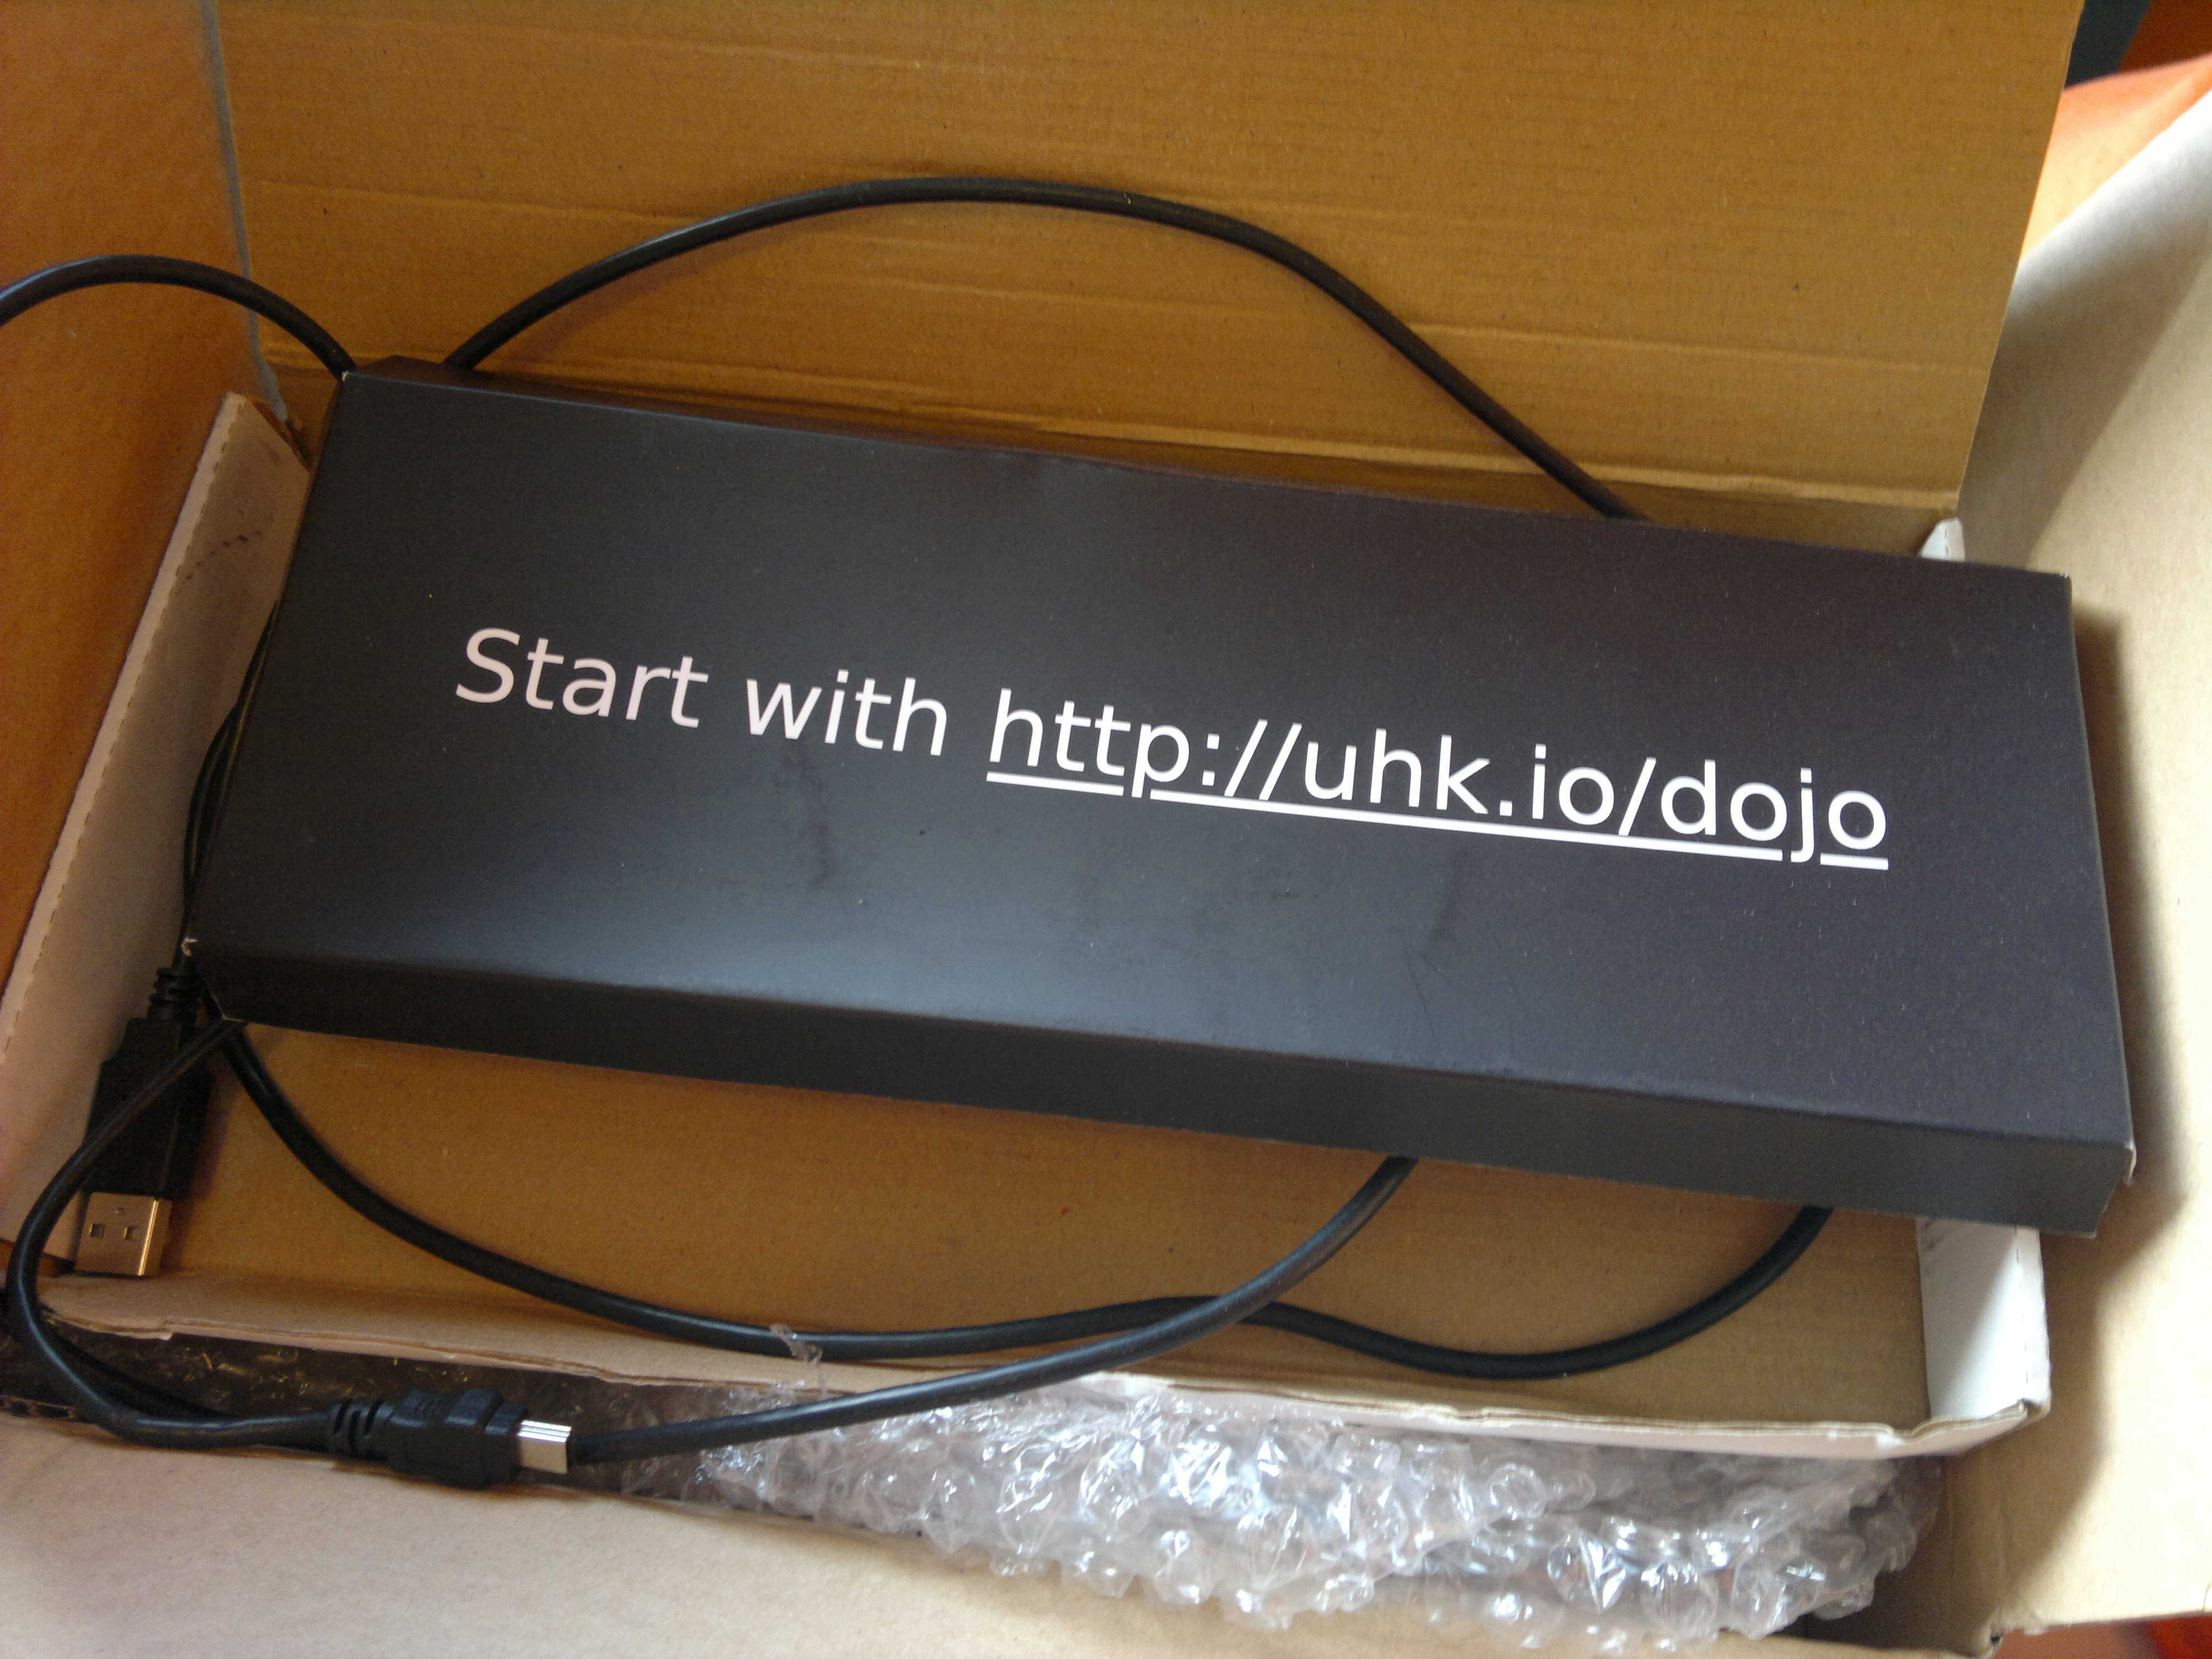 The dojo introduction paper in the unboxing.